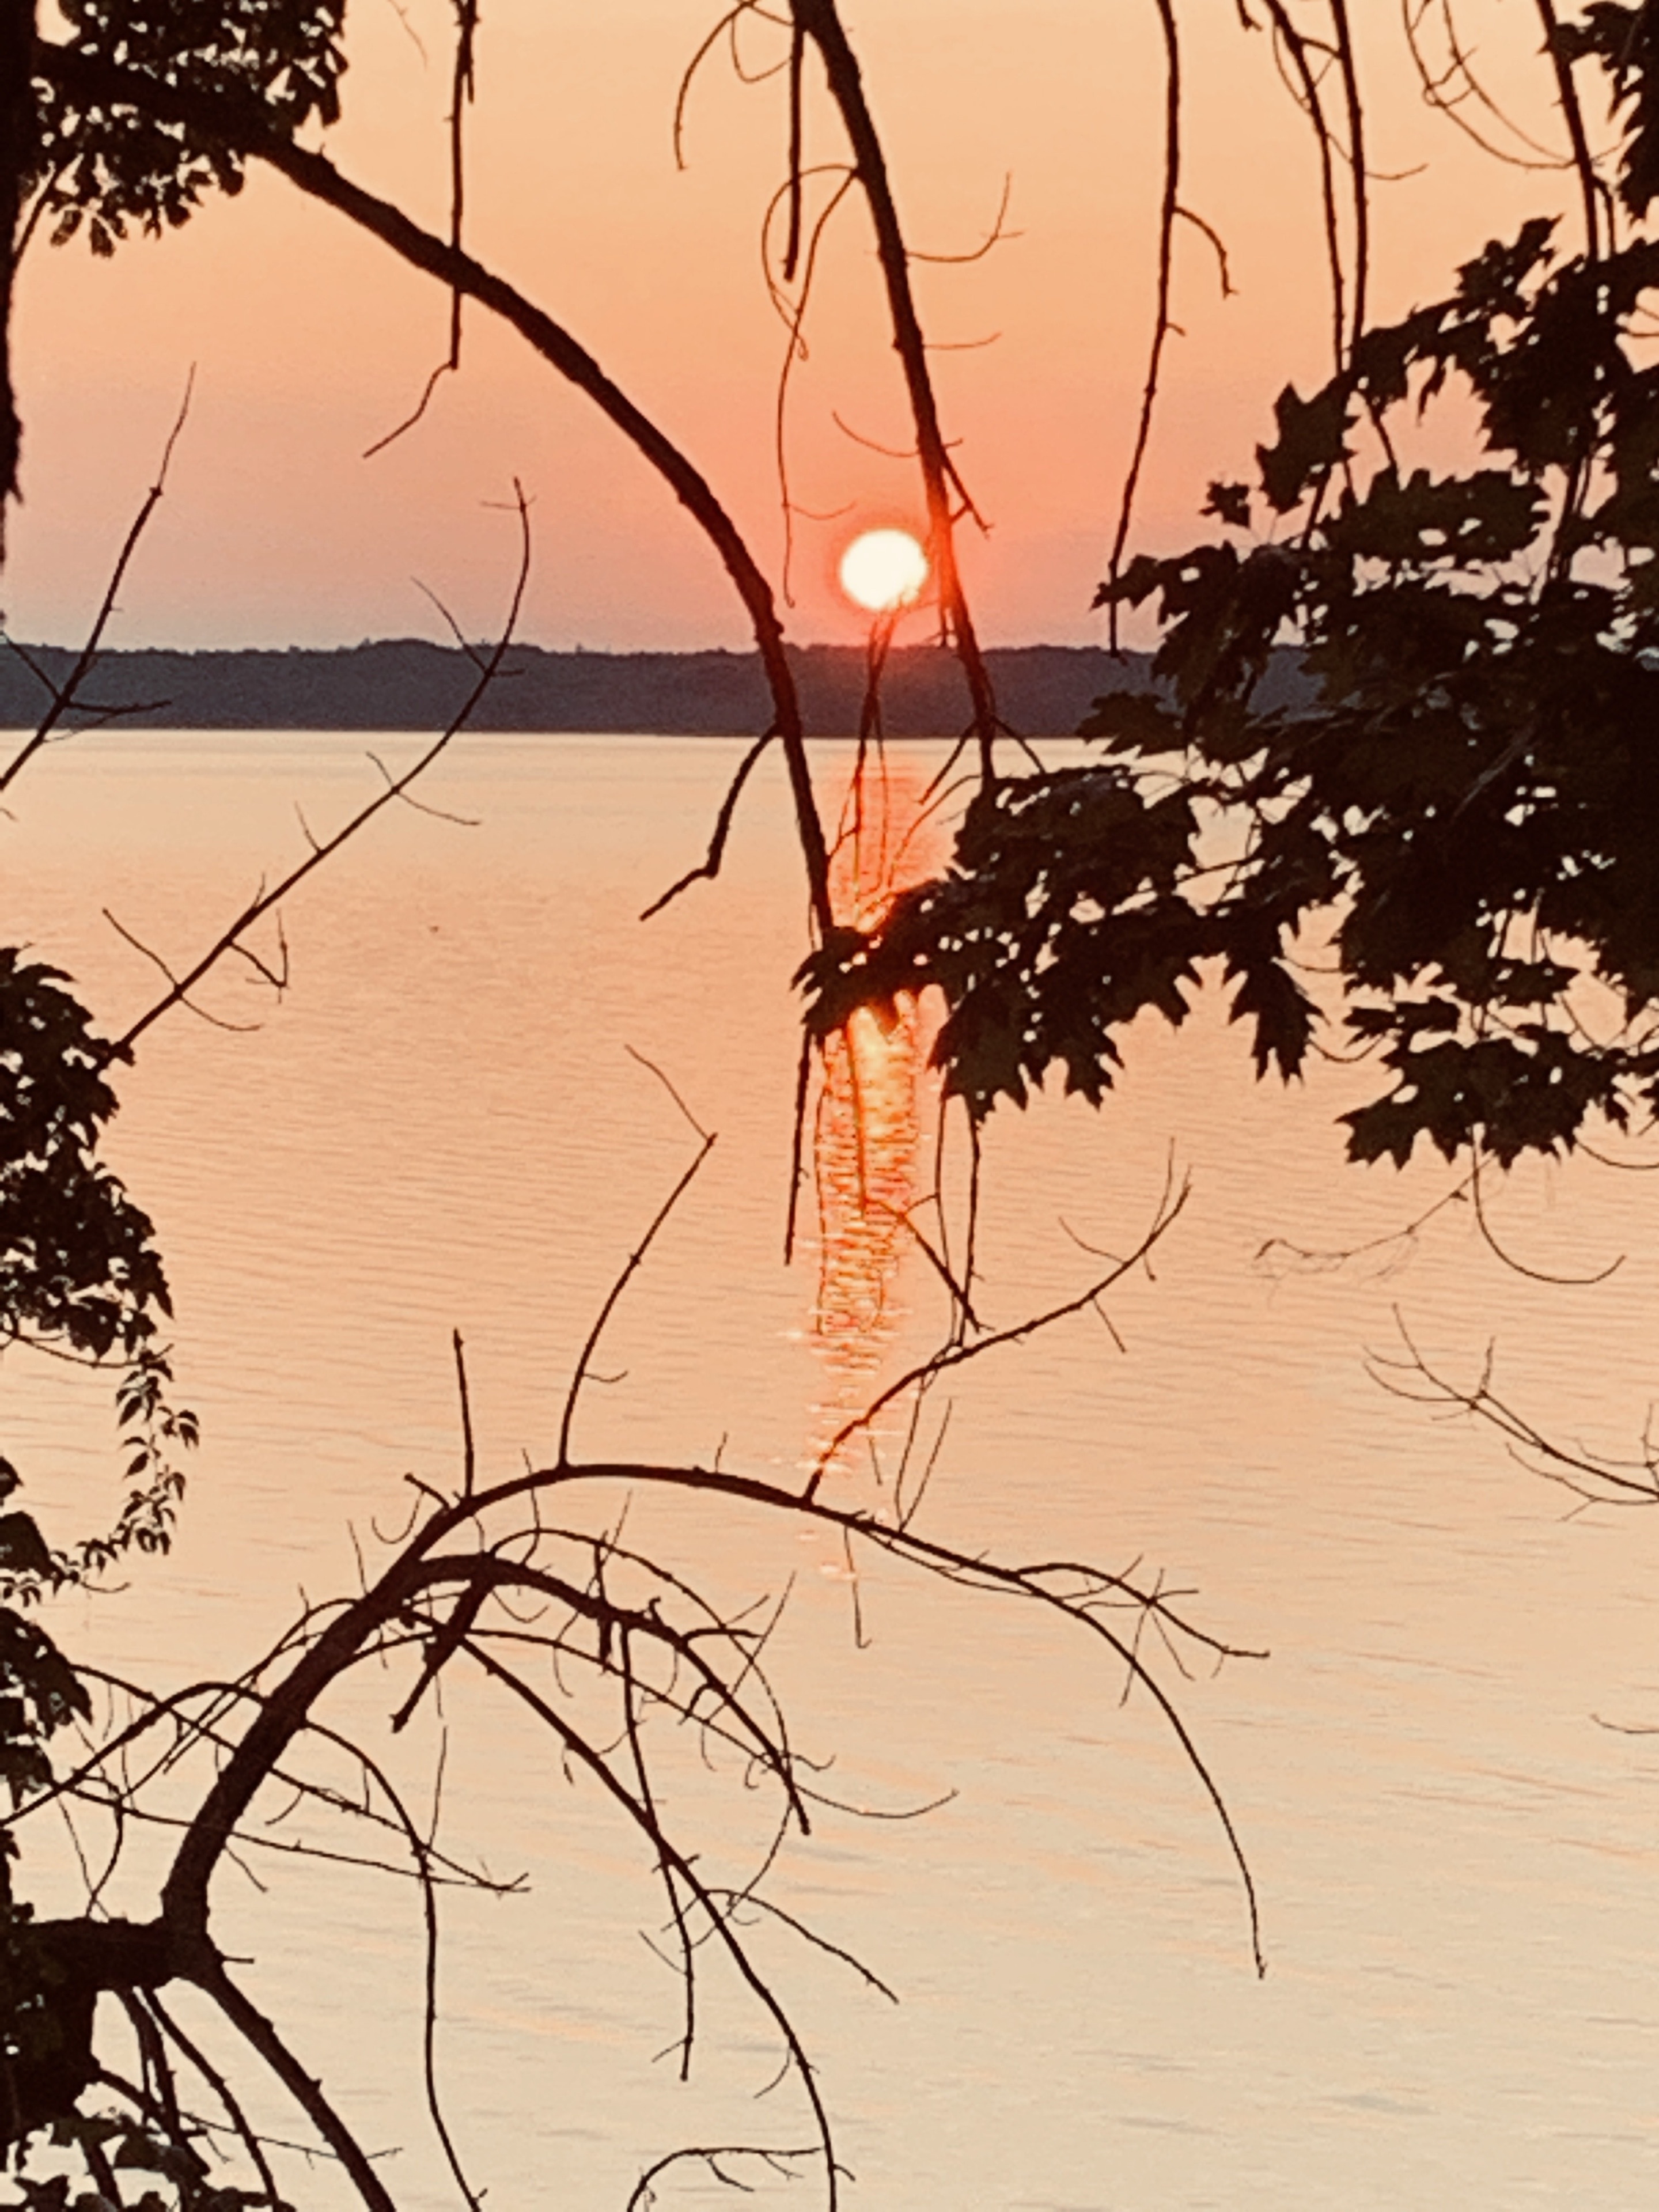 It really does pay off to wake up early and catch the sunrise. To behold the glory of God at the start of a new day. Interlochen State Park is one of our favorite places to pitch a tent. #michigancamping #michigan #sunrise